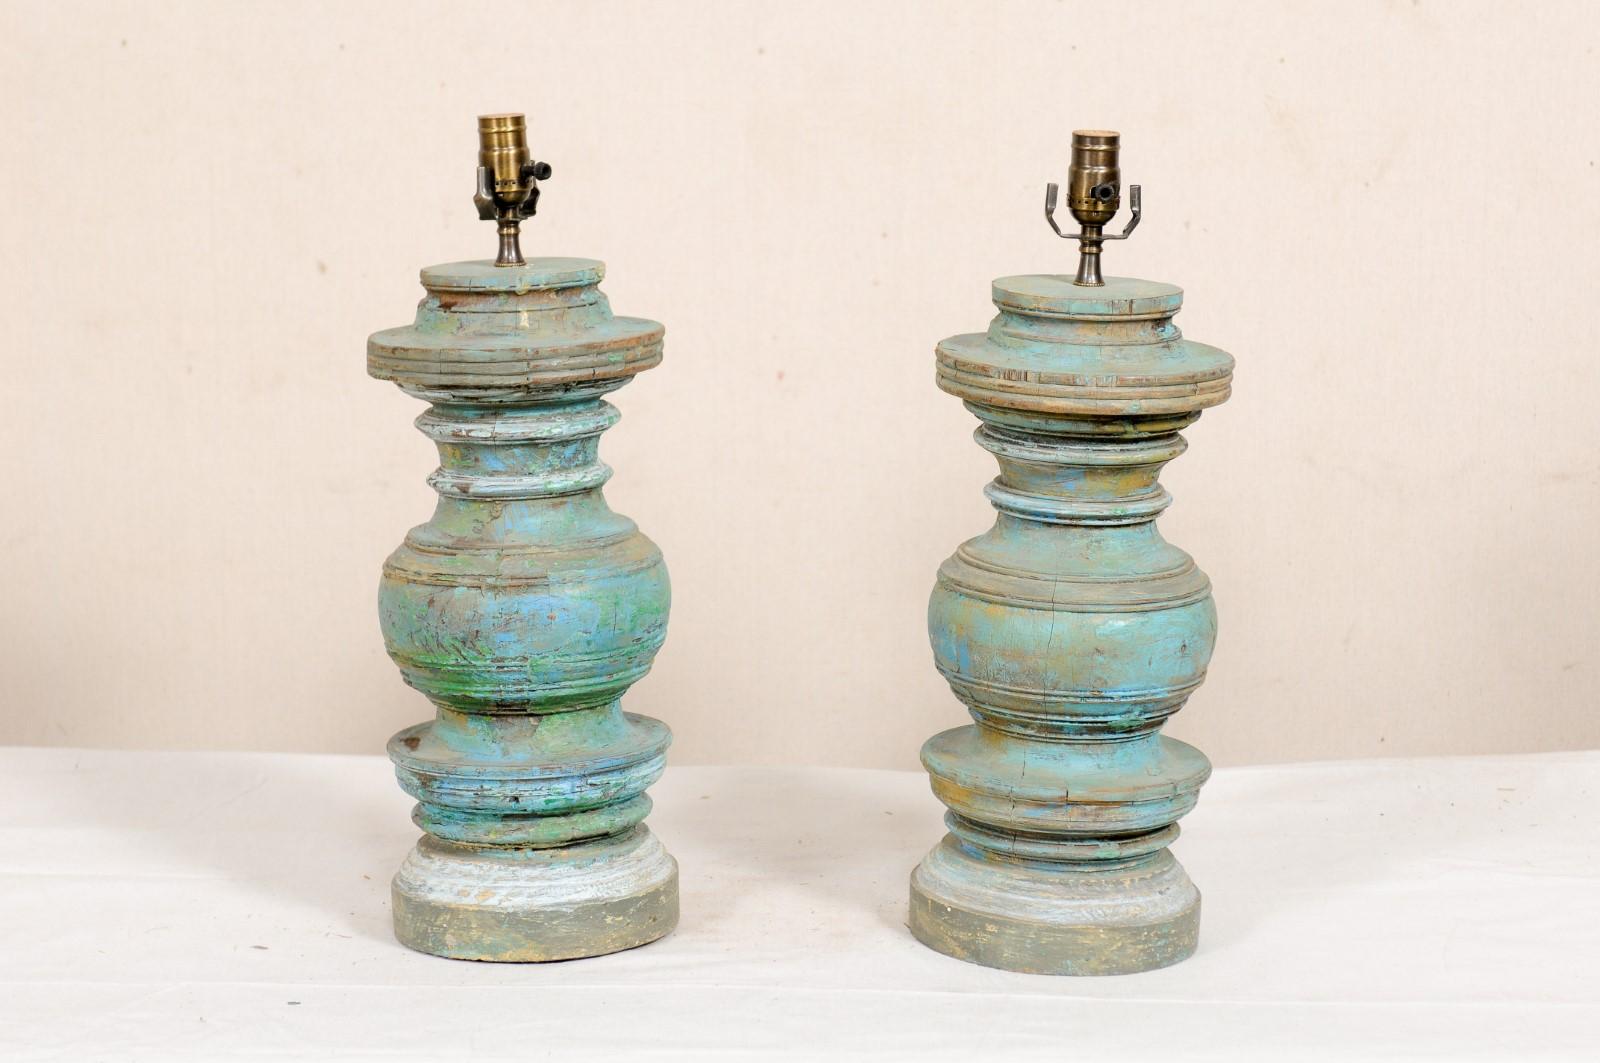 A pair of painted and nicely turned table lamps fashioned out of old wood columns. This pair of lamps feature a thick central column, heavily carved with concentric circular rings and trim about the exterior, and raised on a stacked and rounded